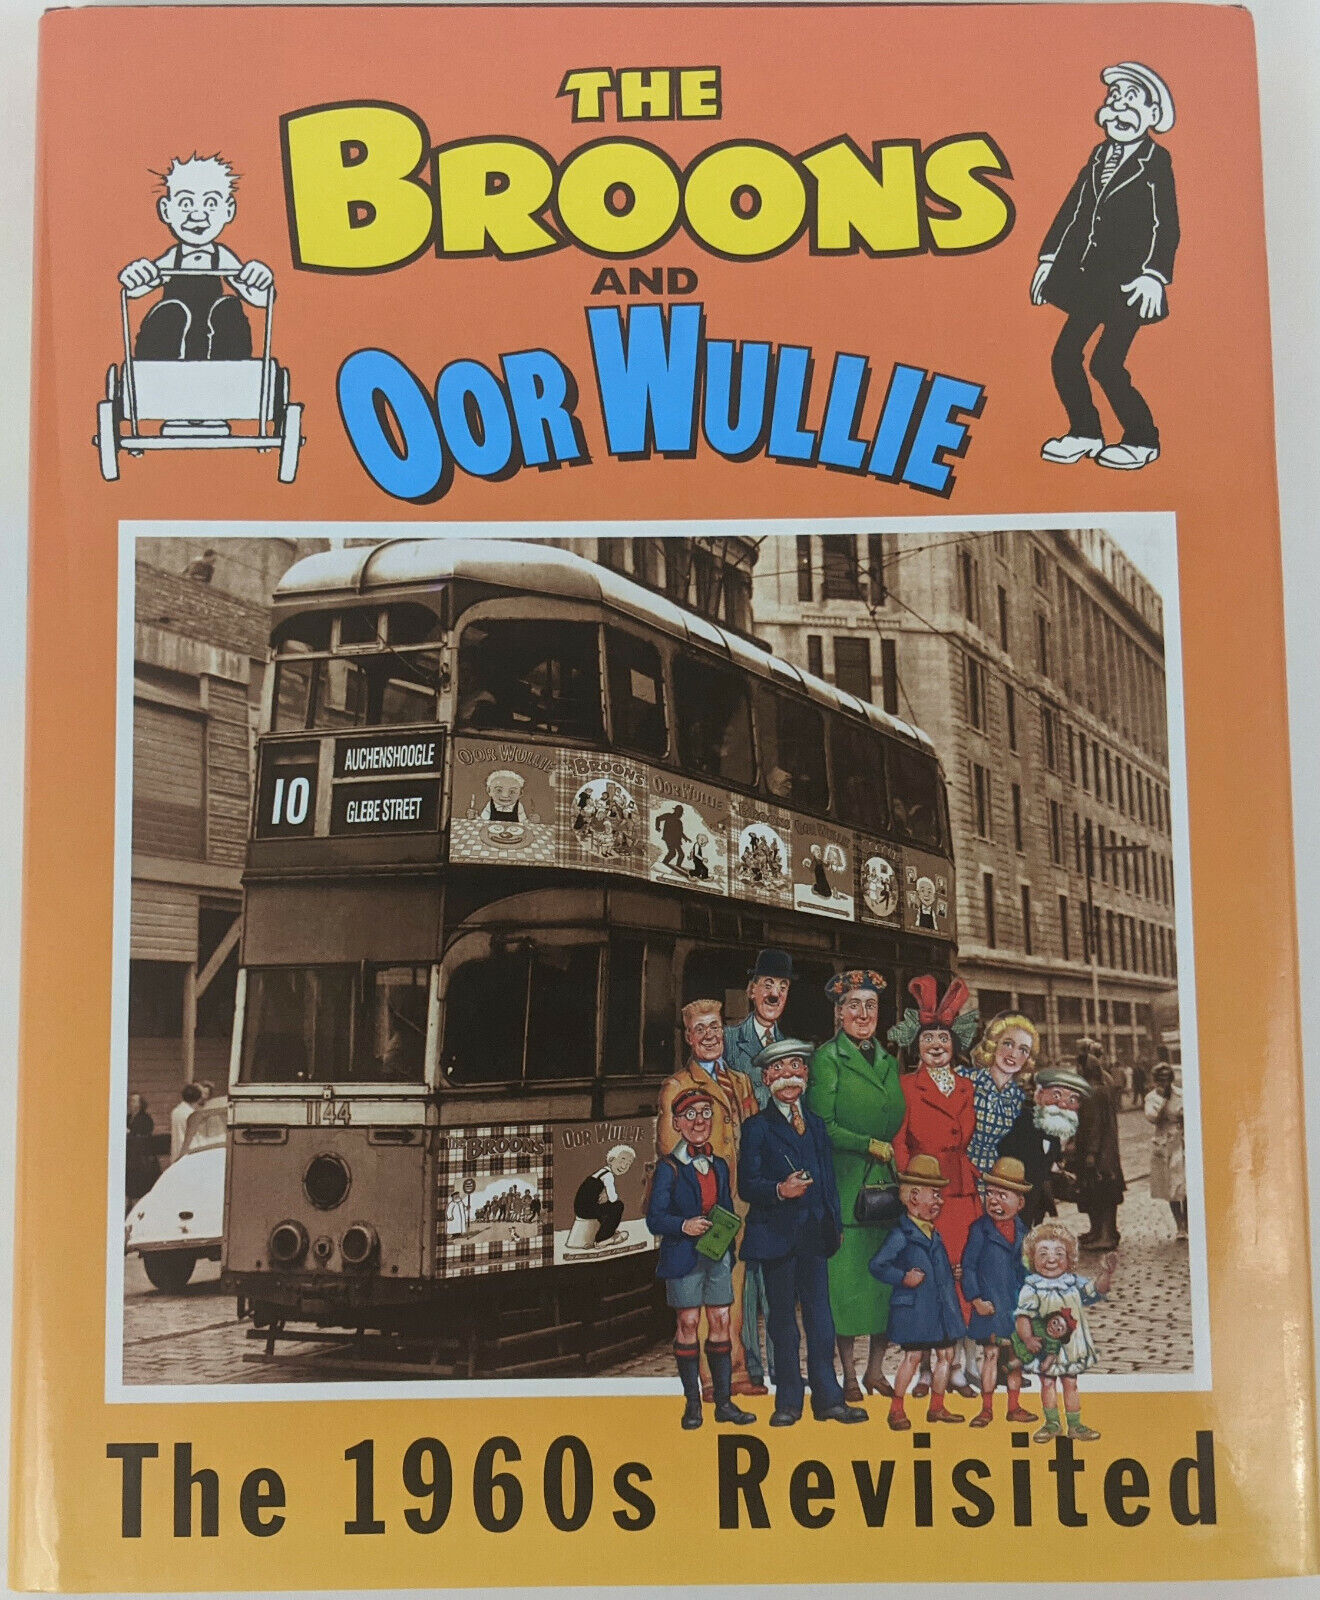 The Broons and Oor Wullie The 1960s Revisited Hardcover Book Dust Jacket 2004 LN